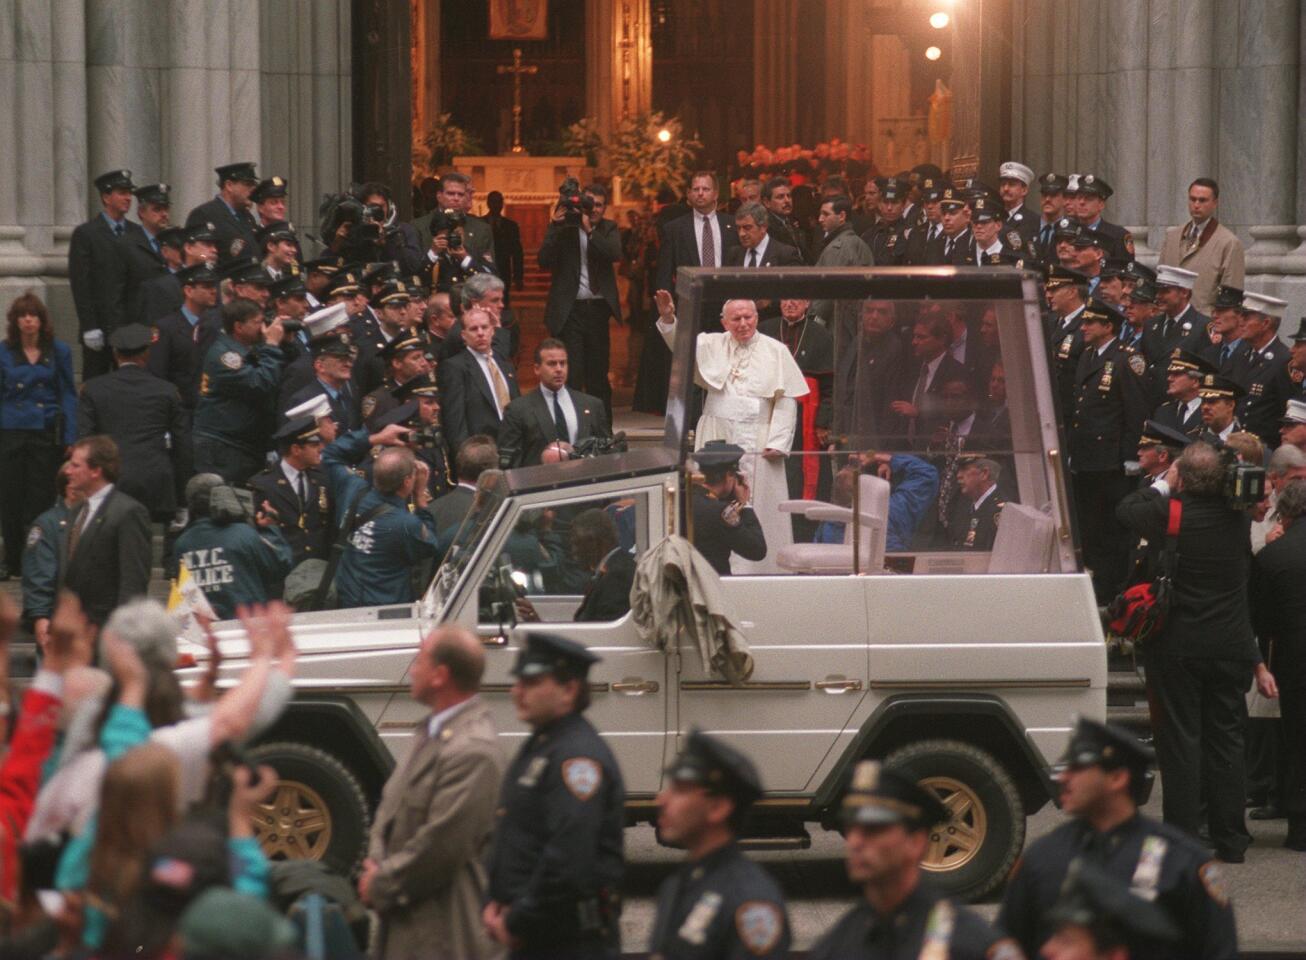 Pope John Paul II at St. Patrick's Cathedral